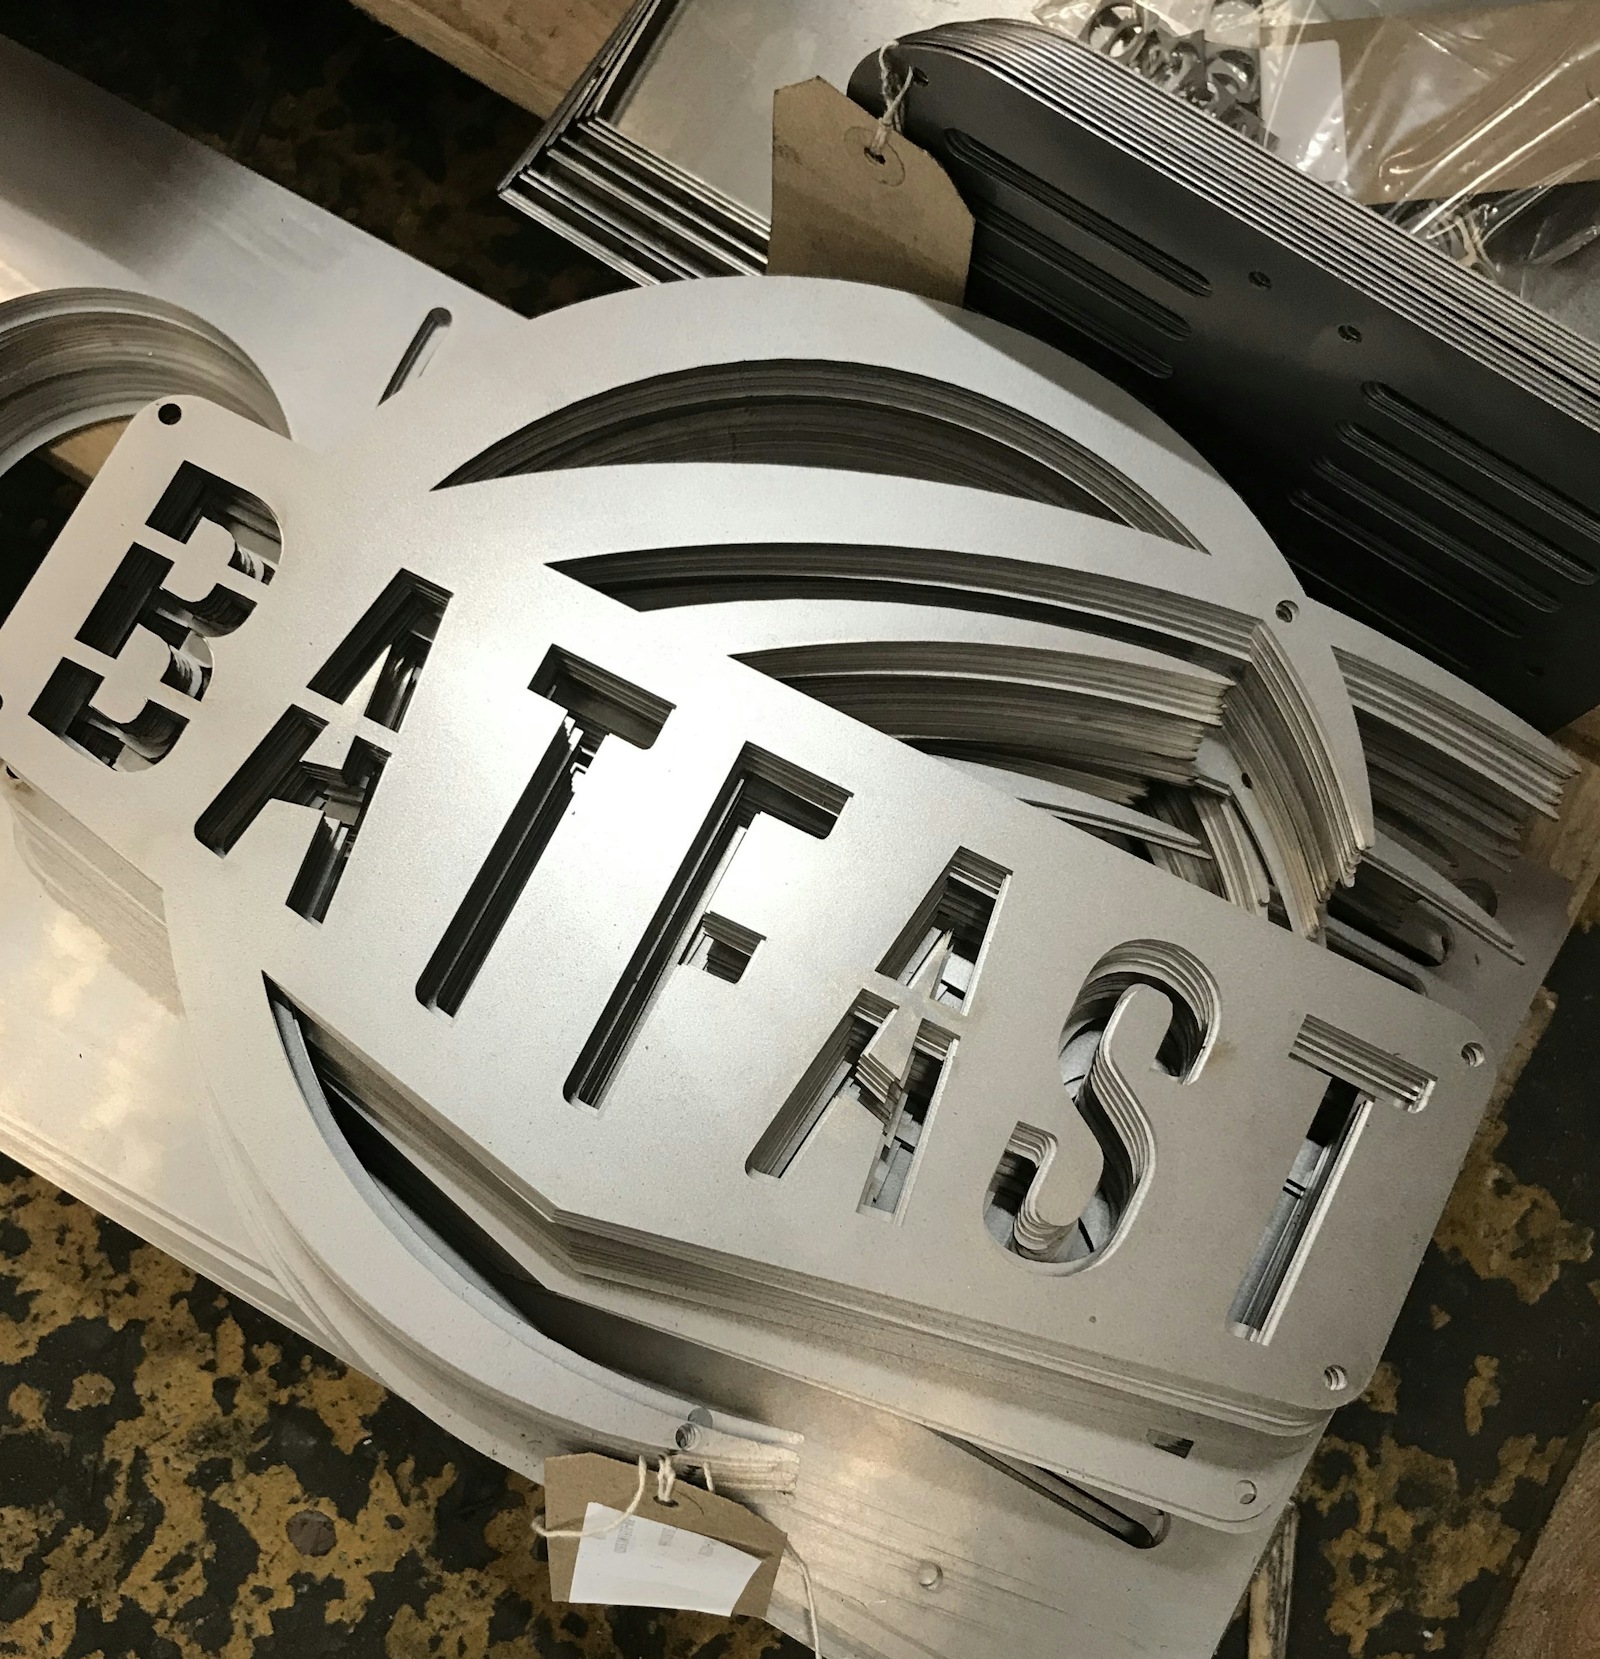 Laser Cutting for Batfast by Laser Expertise